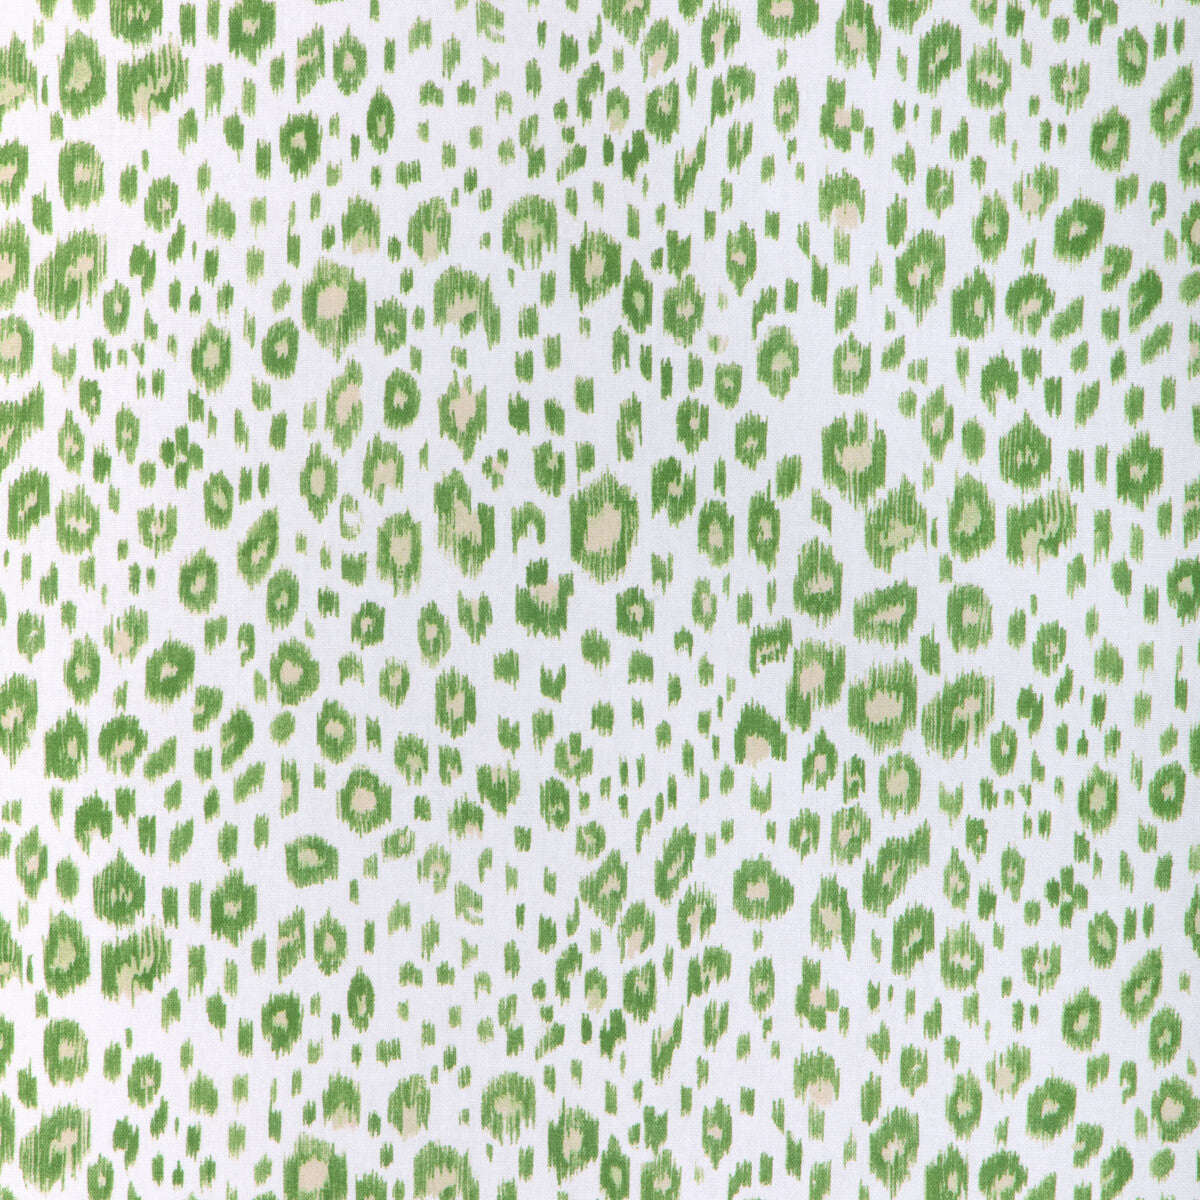 Leopardos fabric in aloe color - pattern LEOPARDOS.3.0 - by Kravet Basics in the Small Scale Prints collection